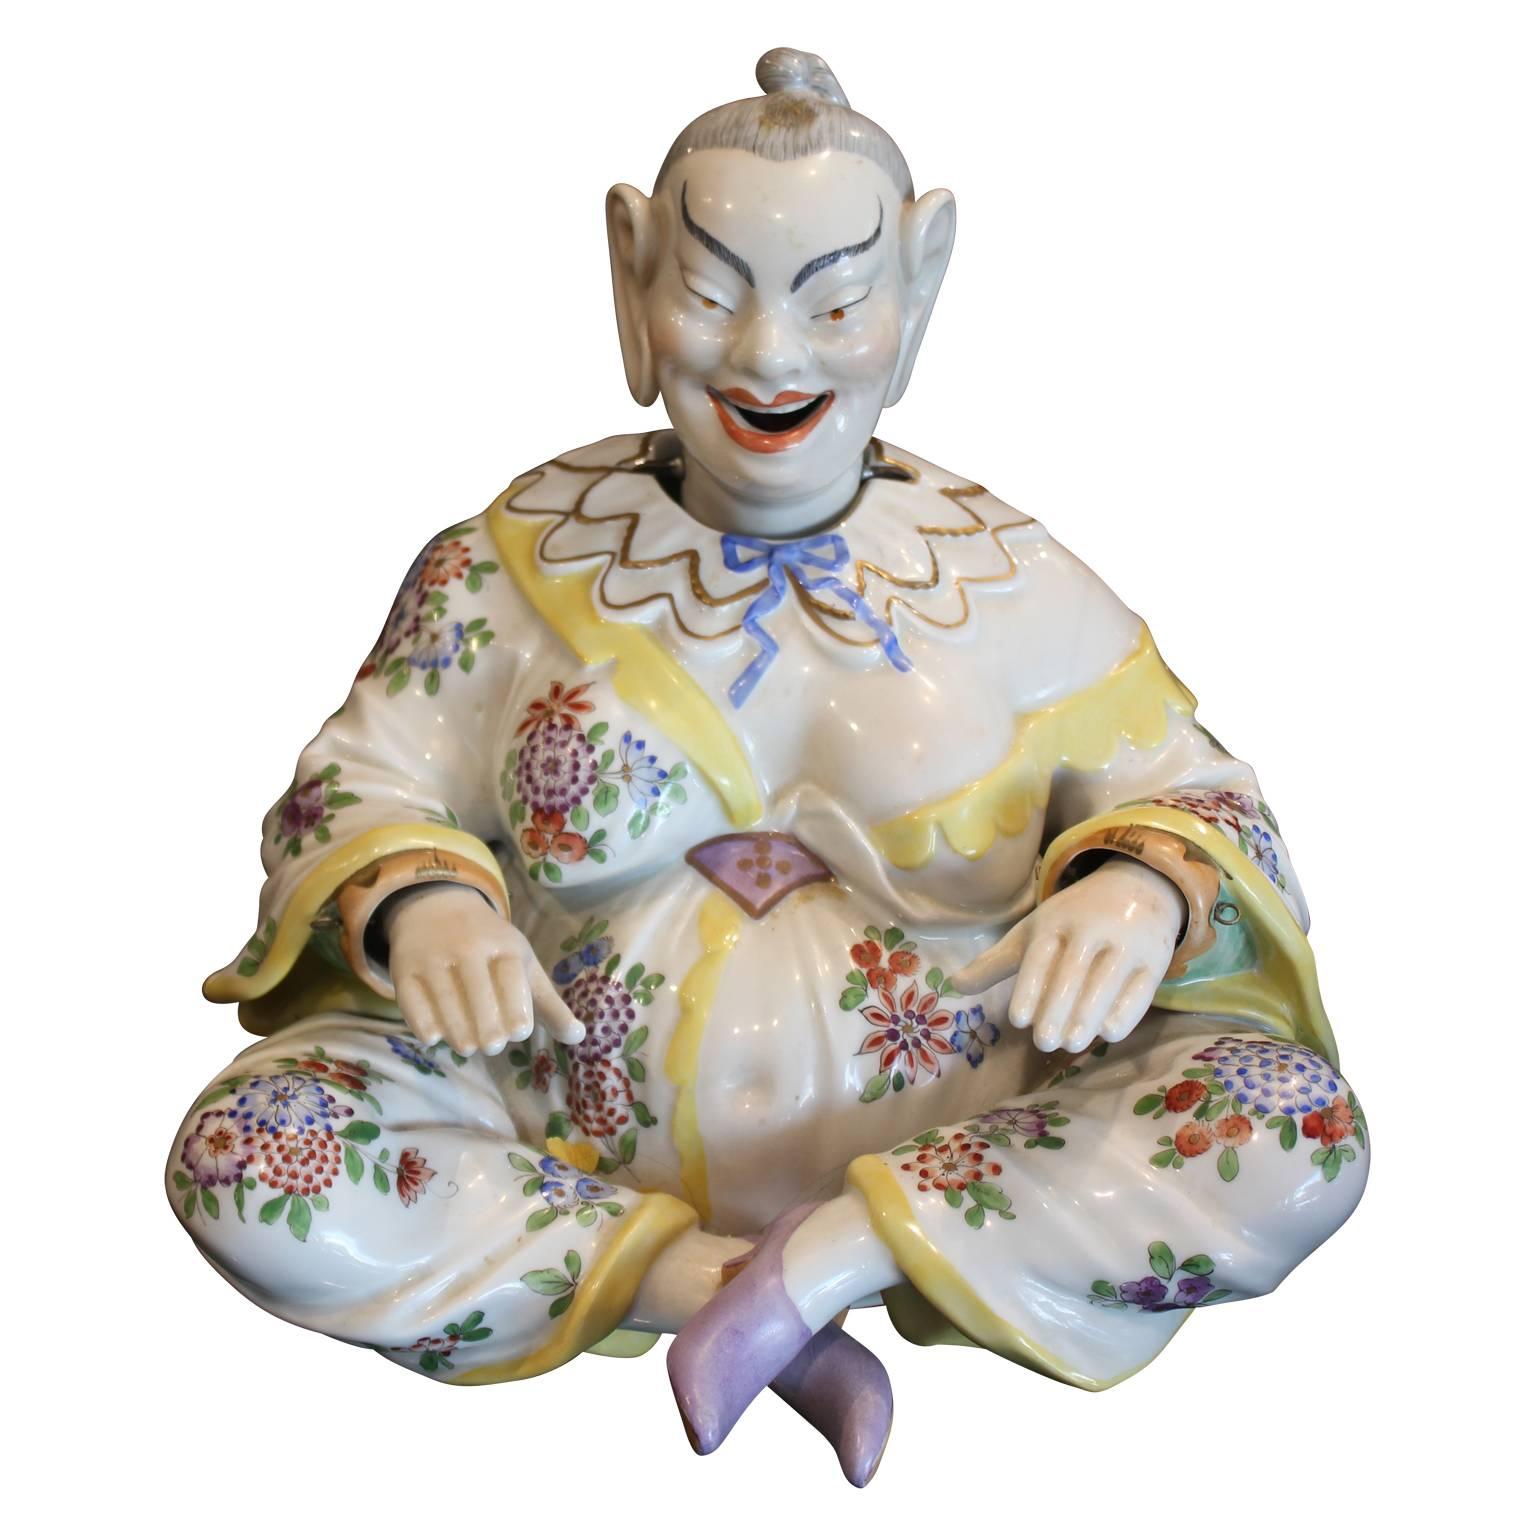 German Porcelain Chinoiserie Nodder Figure of a Chinese Man by Dresden